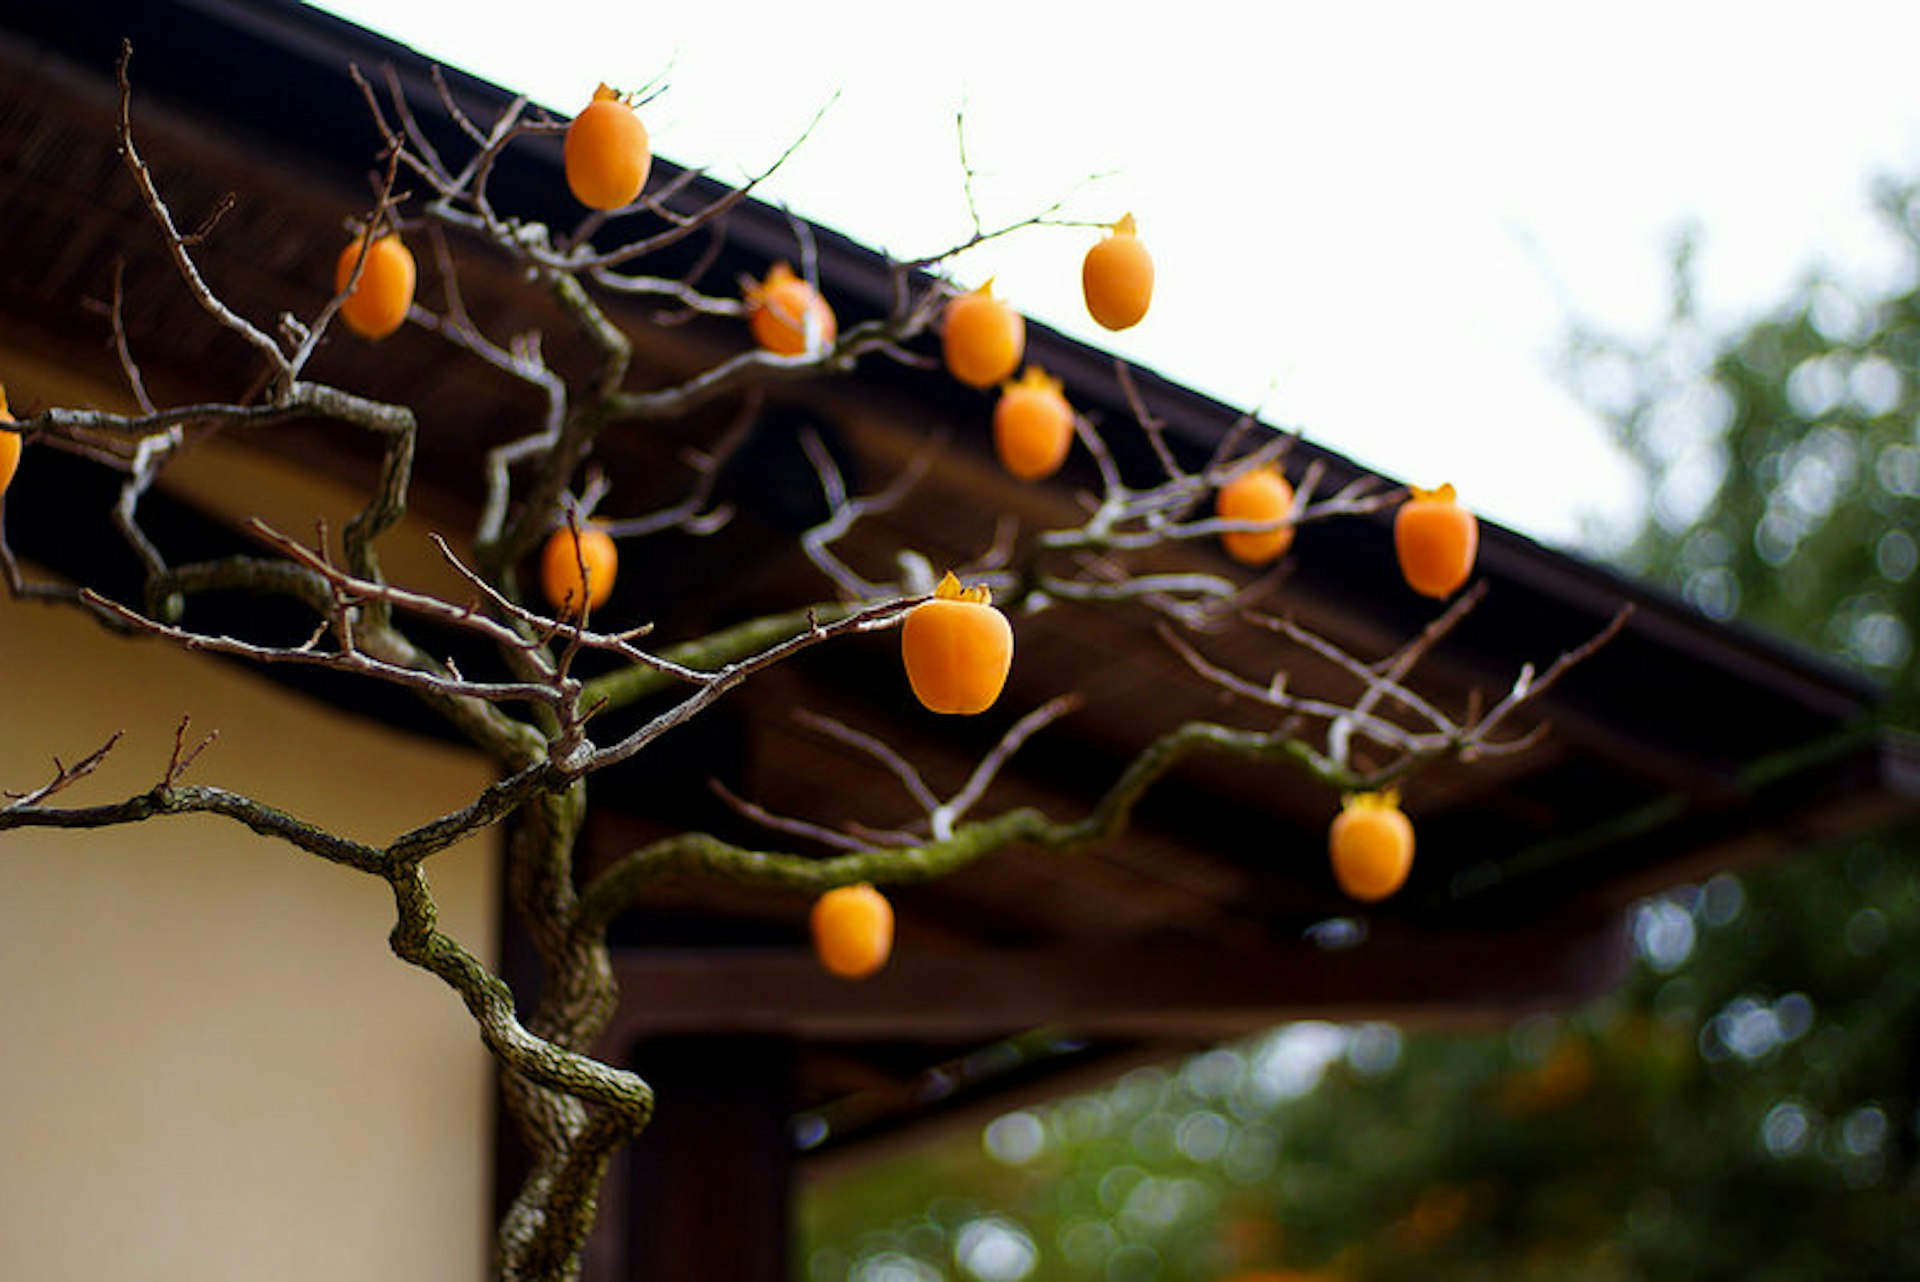 Persimmons. Photo by Takashi.M / CC BY 2.0.